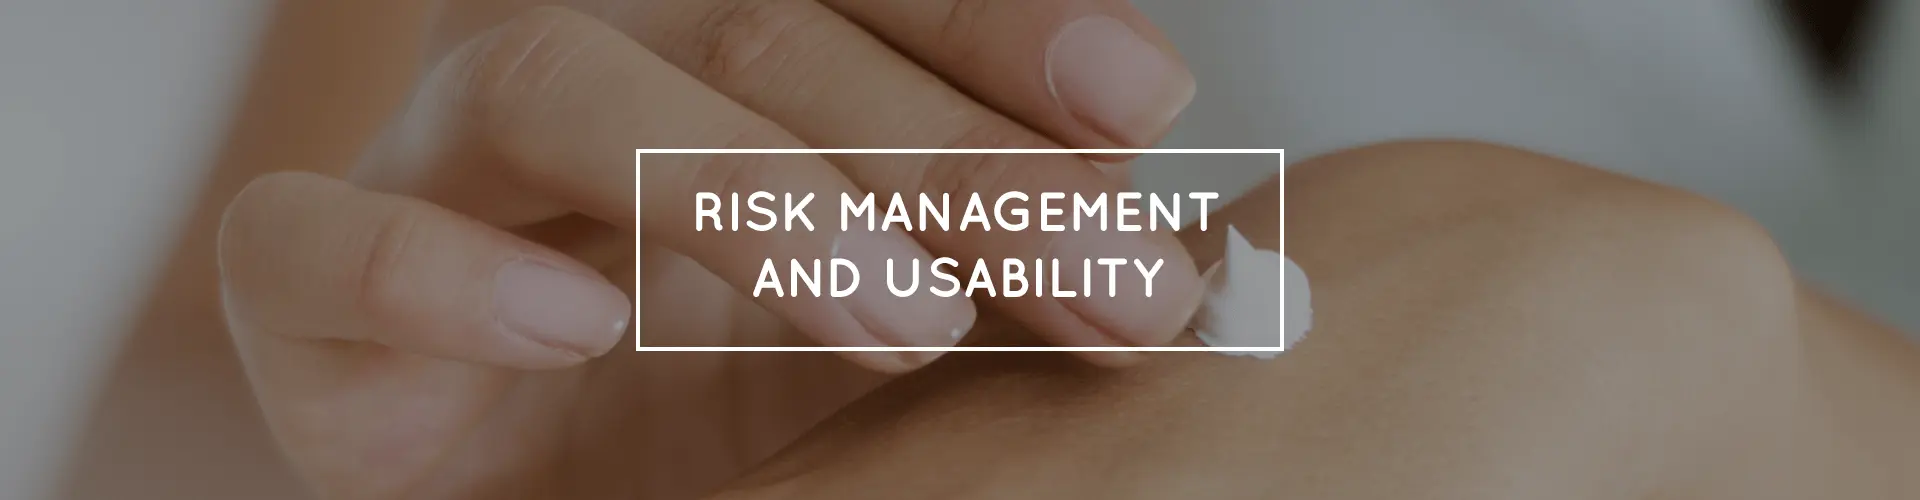 risk management and usability